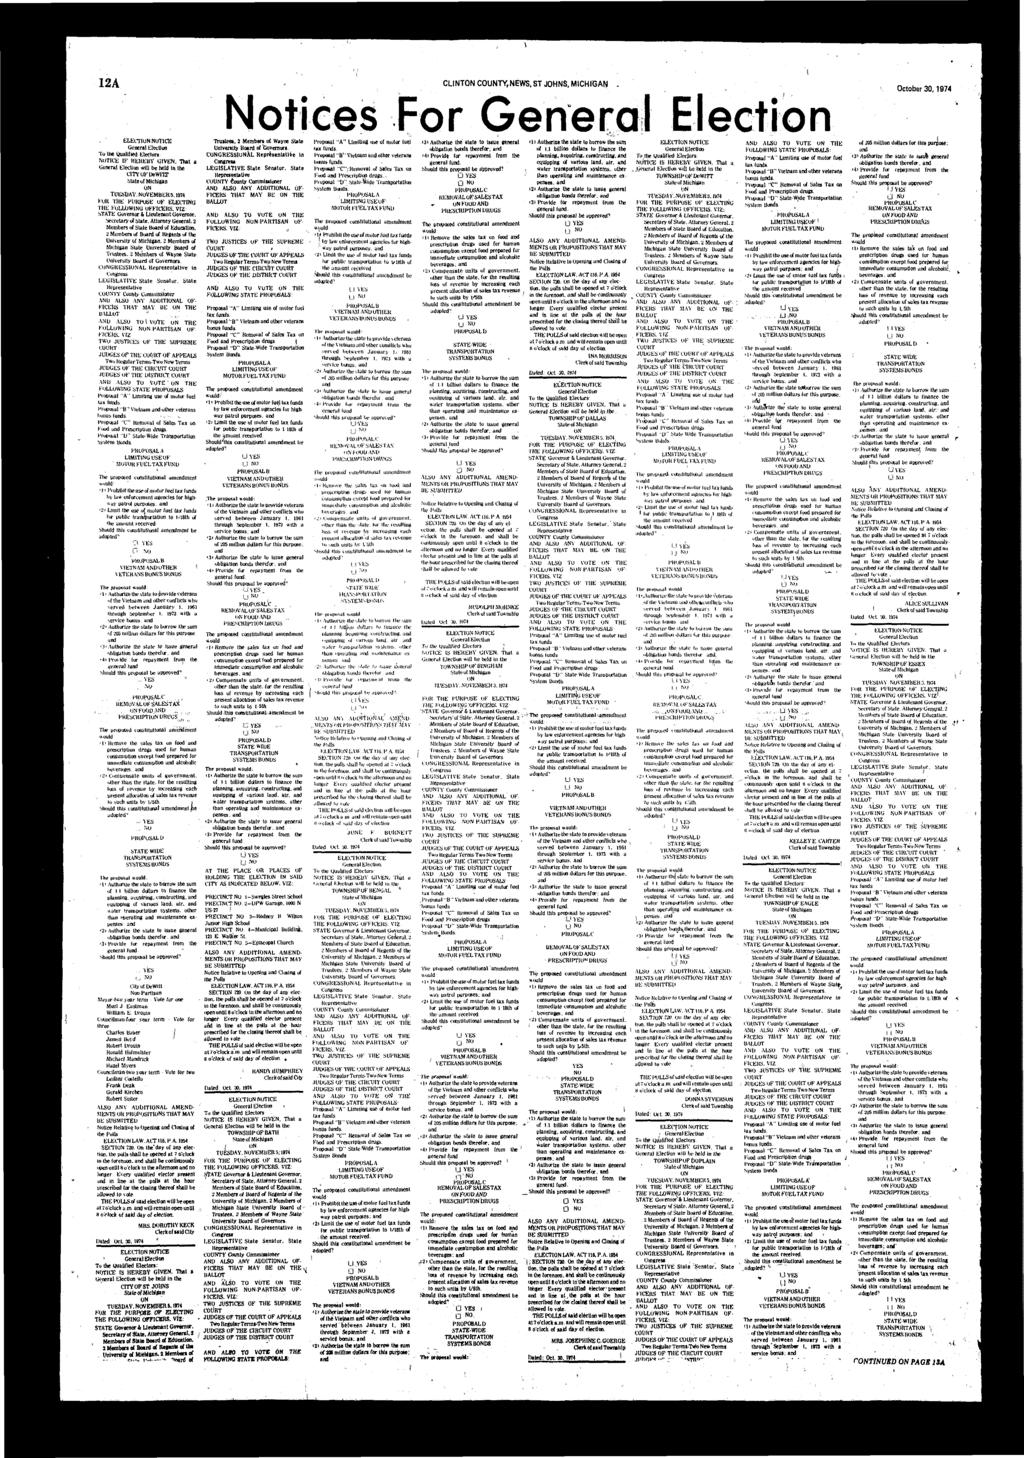 12A CLINTON COUNTY,NEWS, ST JOHNS, MICHIGAN Notices For Gene October 30,1974 ELECTION NuTlCE To Ihe Qulified Electors NOTICE IF HEREBY GIVEN, Tht will be held in the cityoiruewnr Stte of Michign UN